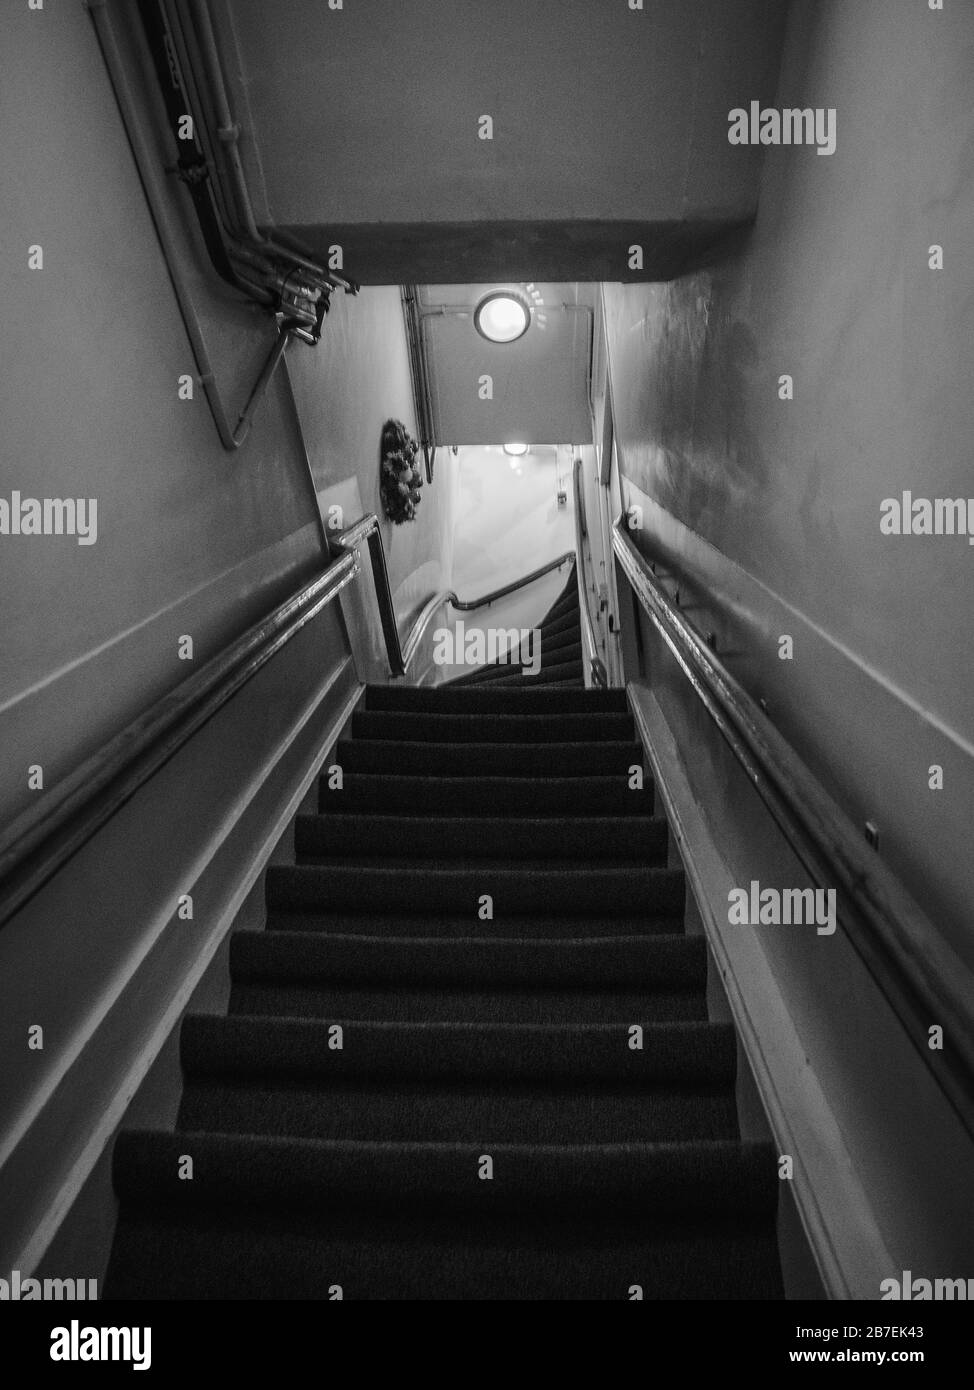 Hand rails and stairs Black and White Stock Photos & Images - Alamy